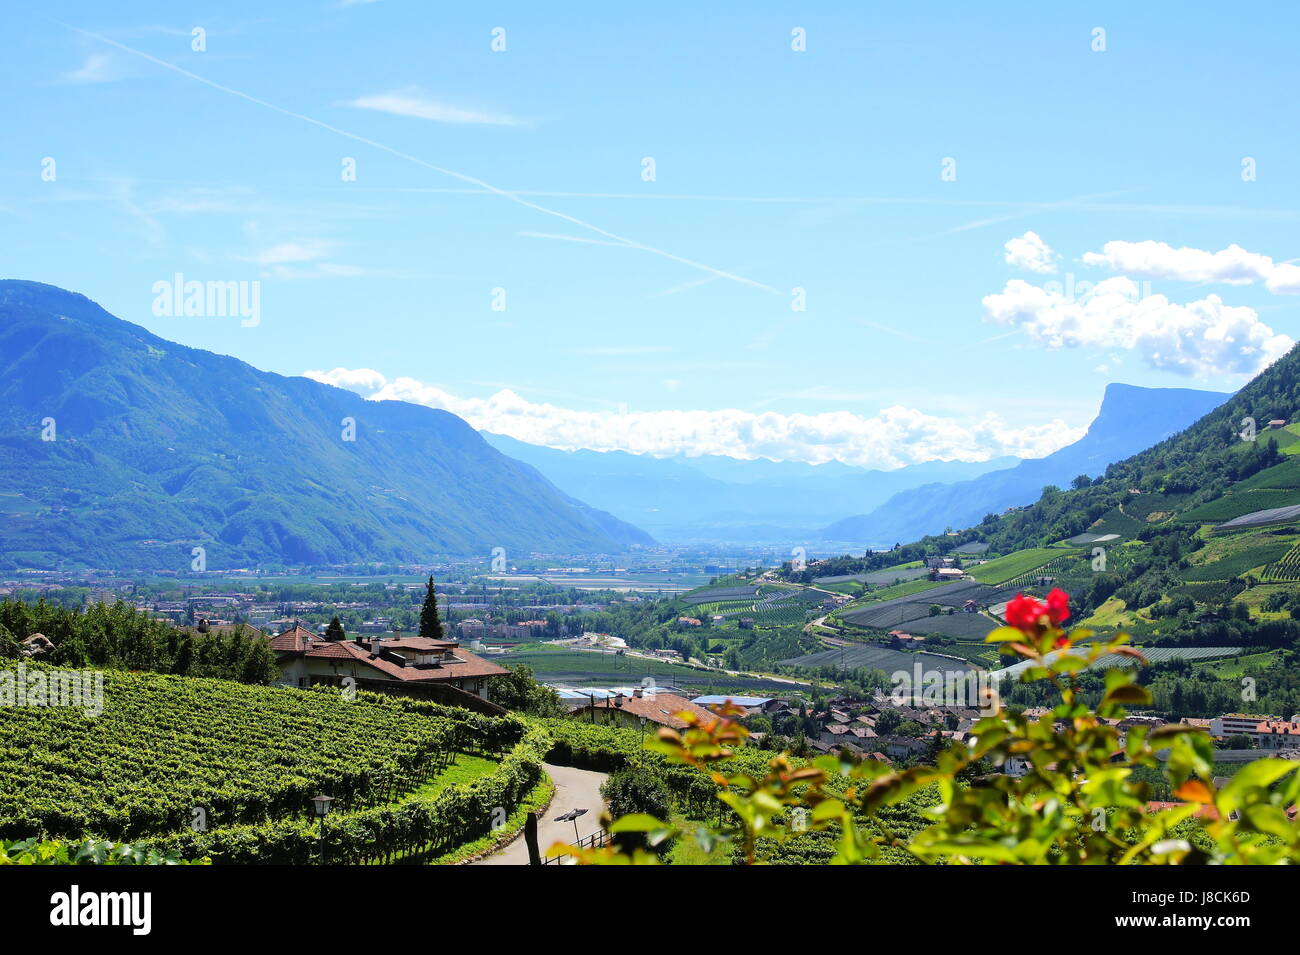 south tyrol, city, town, green, south tyrol, vineyards, cultivation of wine, Stock Photo